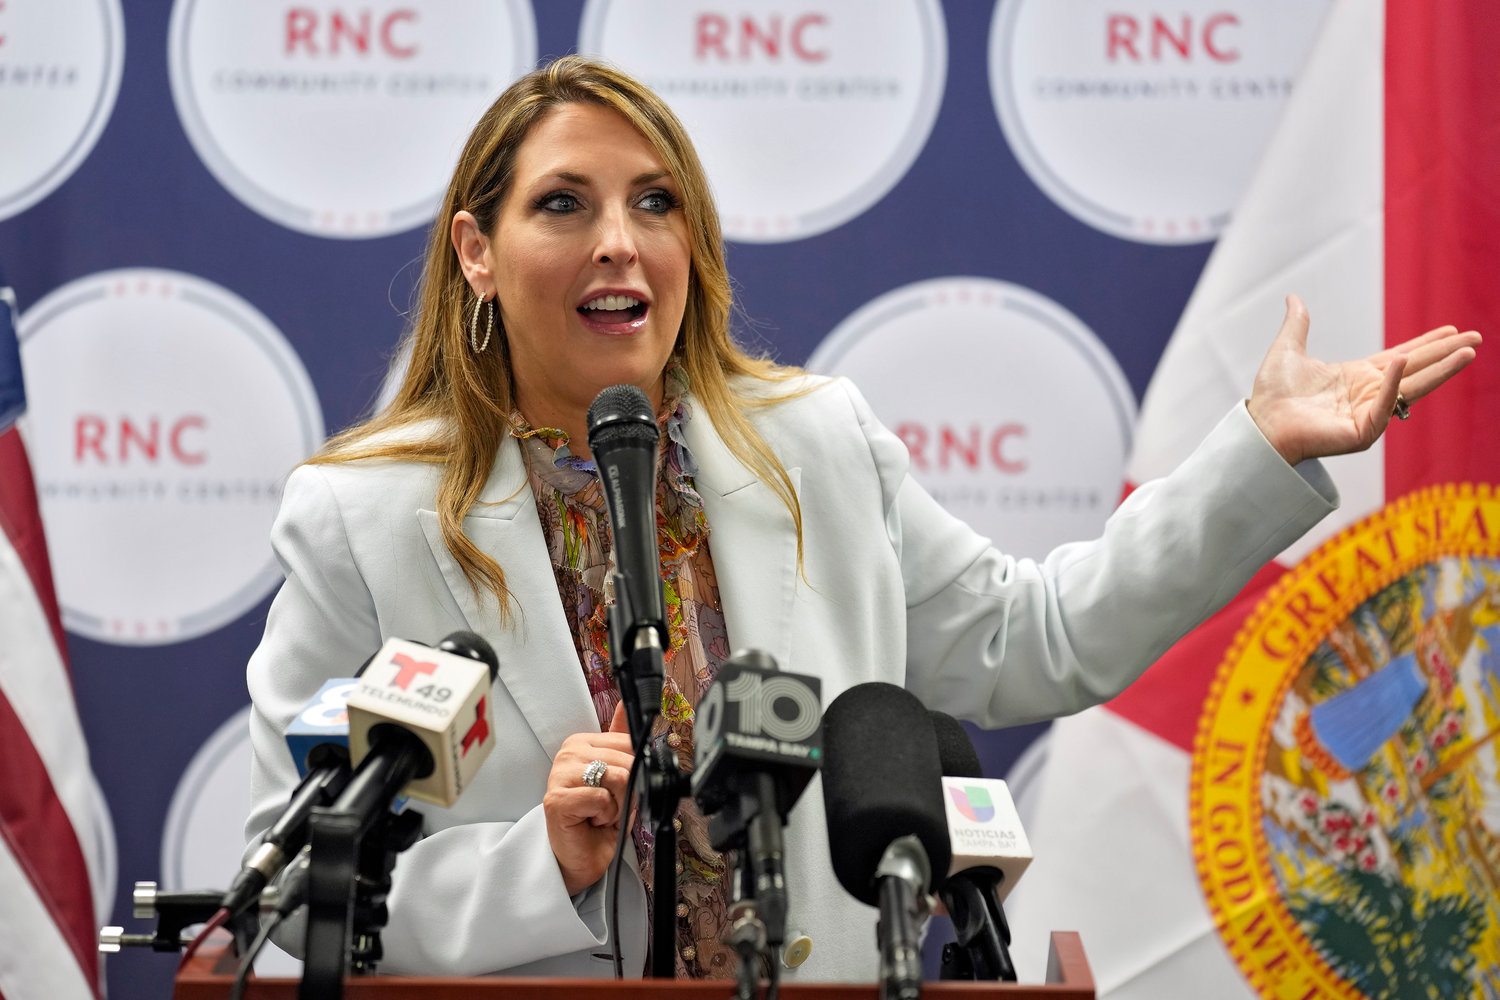 Republican National Committee chairman Ronna McDaniel speaks during a Get Out To Vote rally on Oct. 18, 2022, in Tampa, Fla. The race for RNC chair will be decided on Friday by secret ballot as Republican officials from all 50 states gather in Southern California. McDaniel is fighting for reelection against rival Harmeet Dhillon, one of former President Donald Trump’s attorneys.